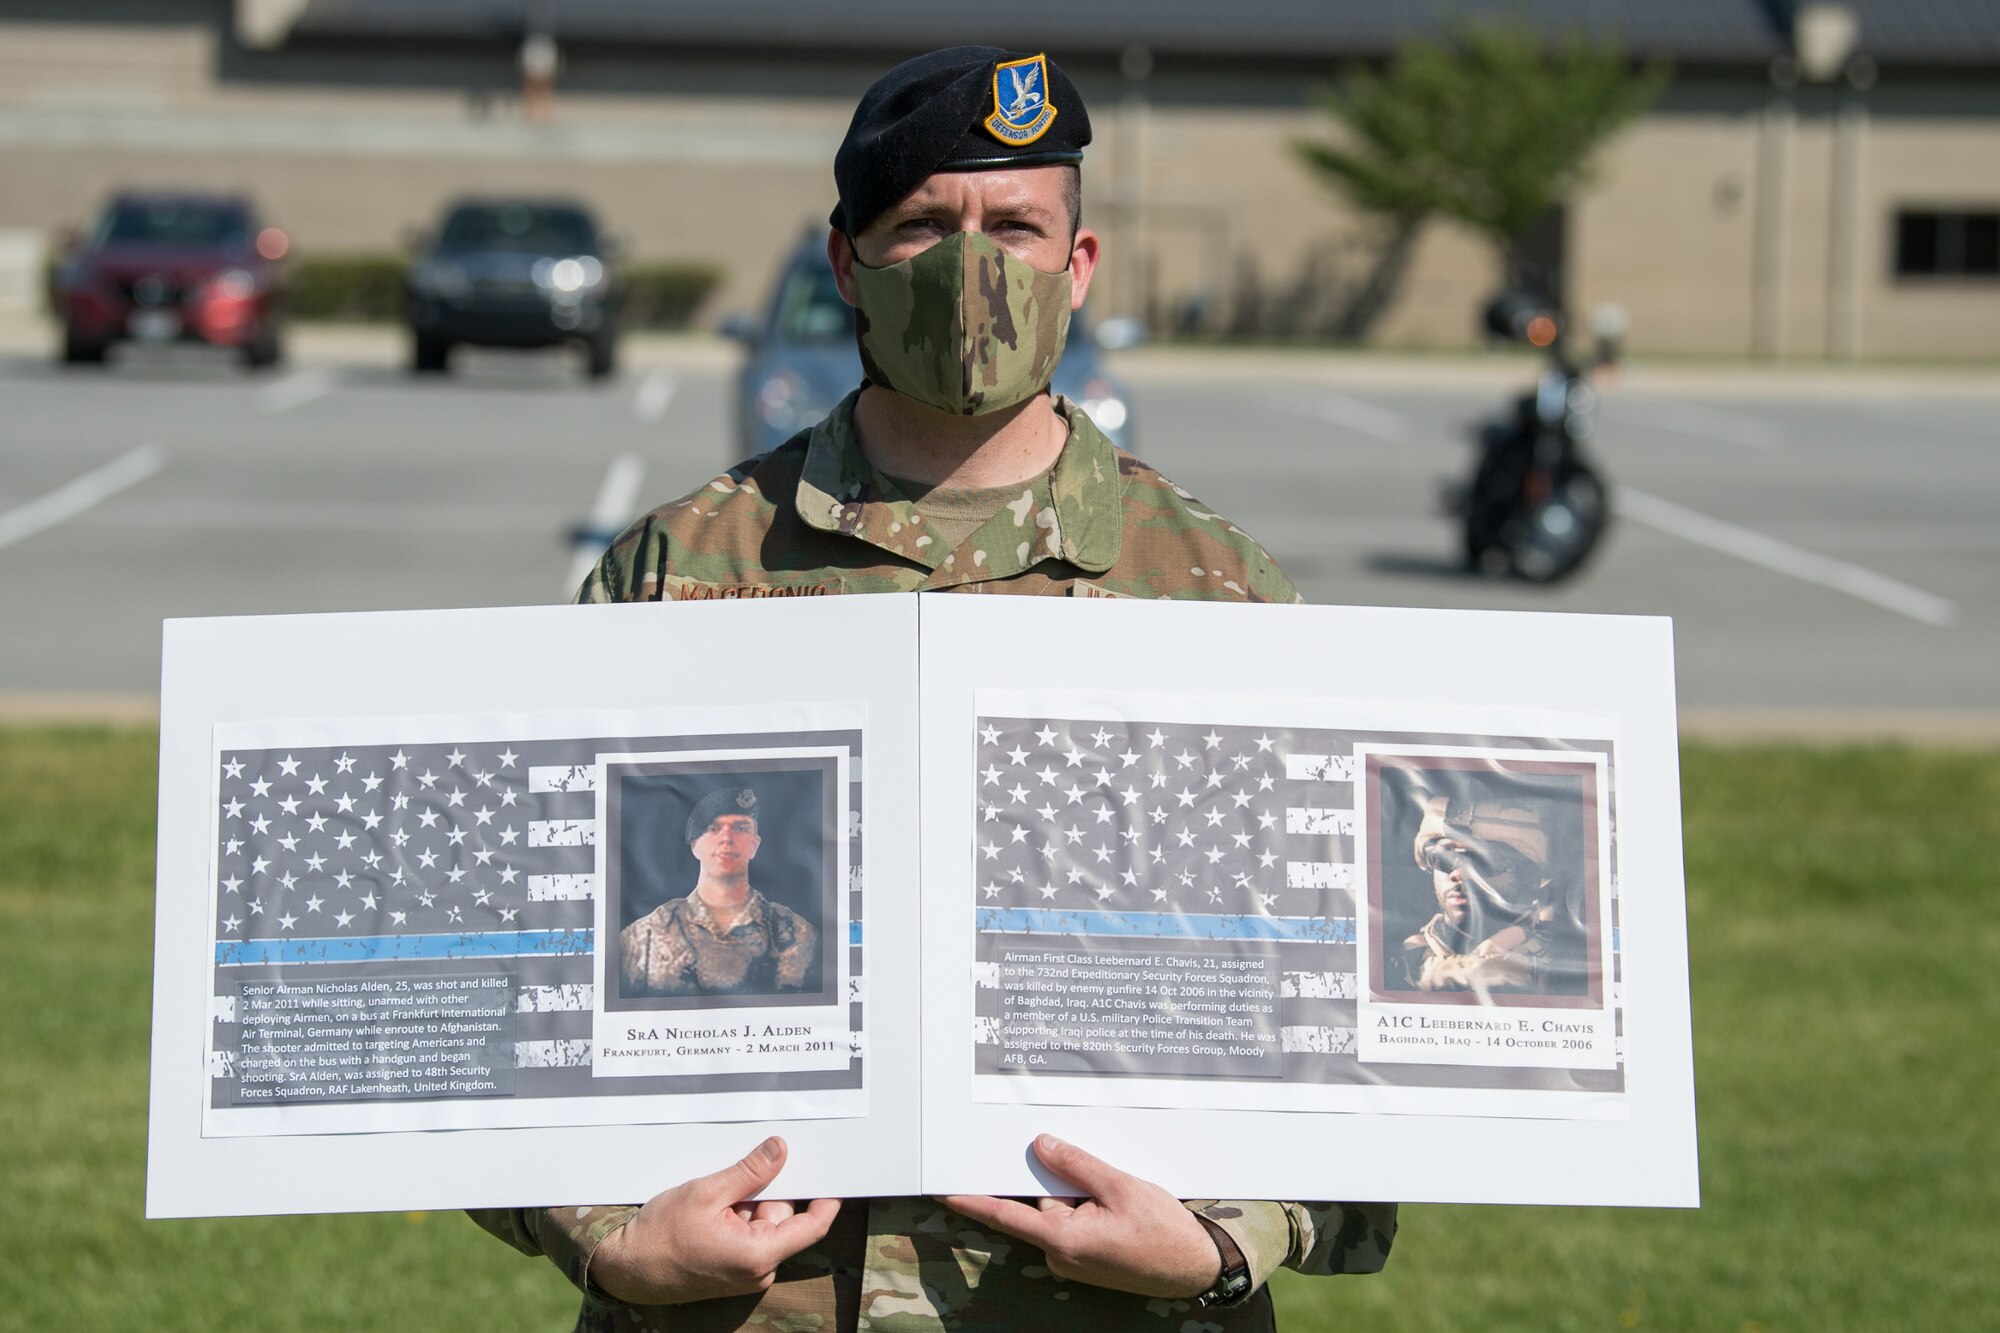 Master Sgt. Justin Macedonio, 436th Security Forces Squadron chief of standardization and evaluation, holds photos of two fallen defenders during a retreat ceremony on Peace Officers Memorial Day May 15, 2020, at Dover Air Force Base, Delaware. The ceremony commemorating fallen military and civilian law enforcement officers marked the end of National Police Week 2020. (U.S. Air Force photo by Mauricio Campino)